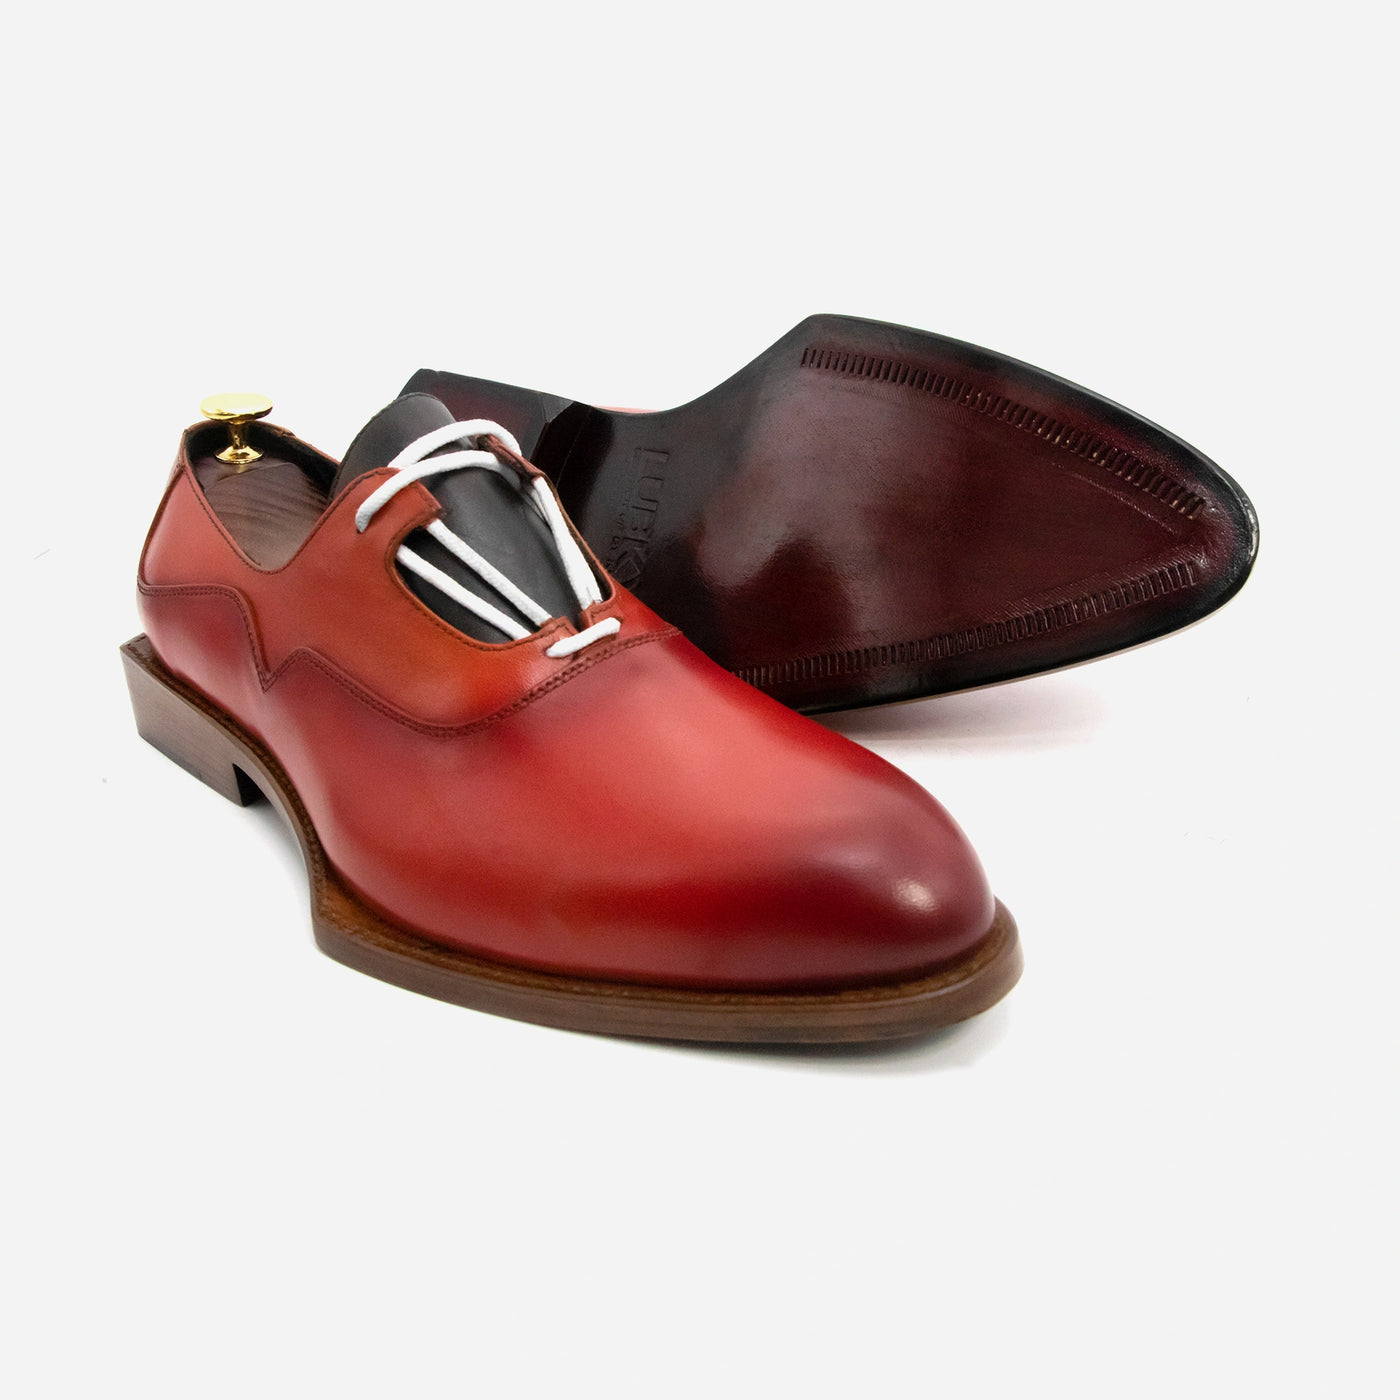 Low Heel Round Toe Classic Oxford Leather Shoes